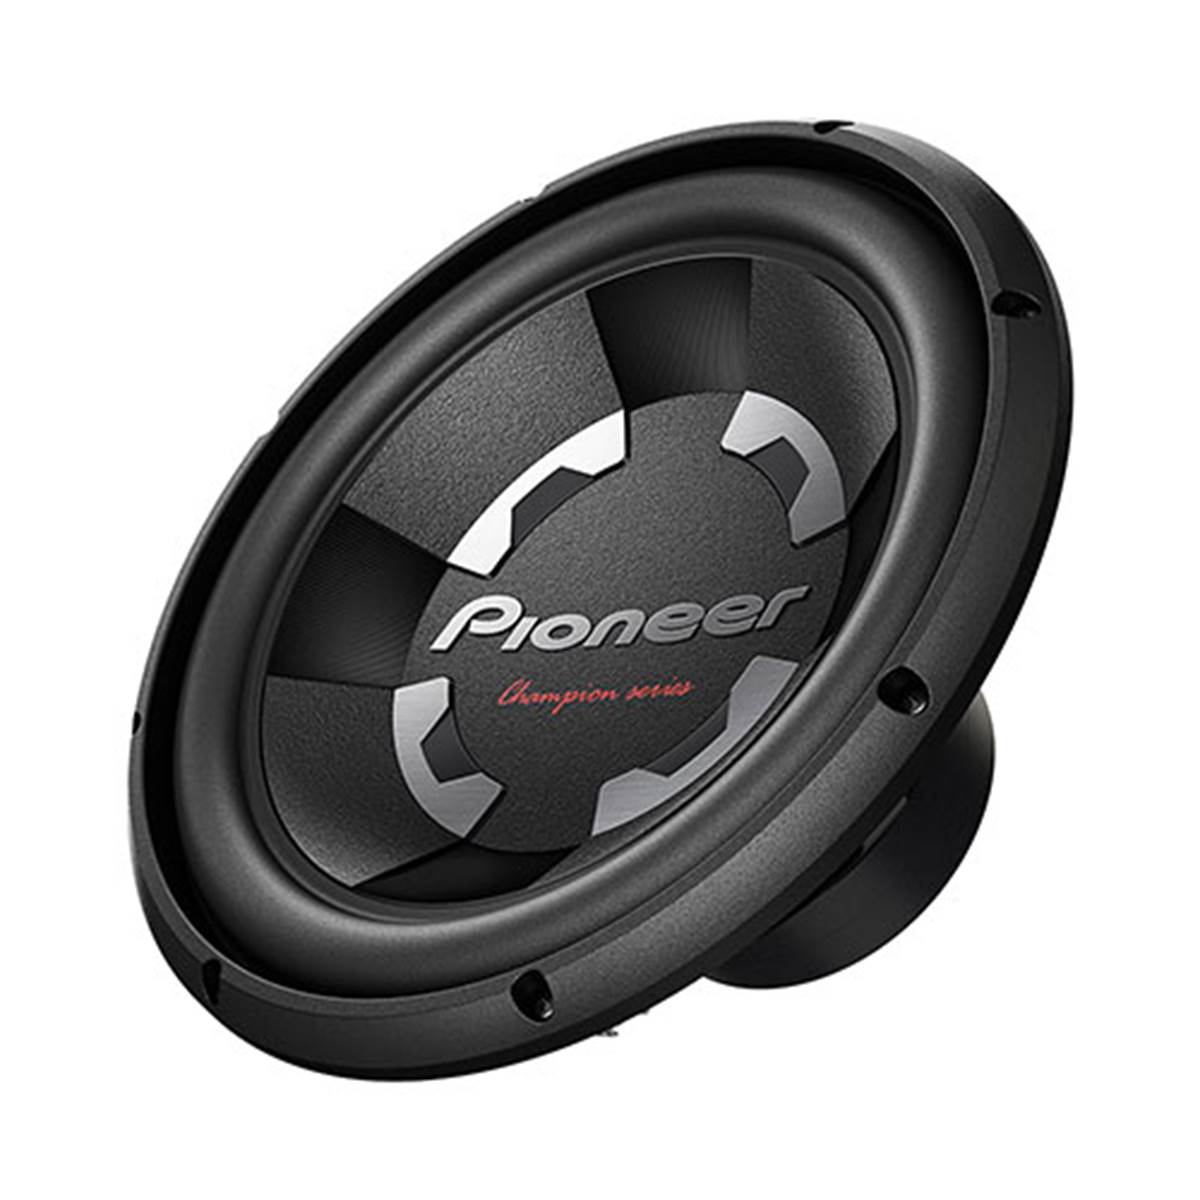 Pioneer SUBWOOFER PARA COCHE 30 CM 1400W  TS 300D4